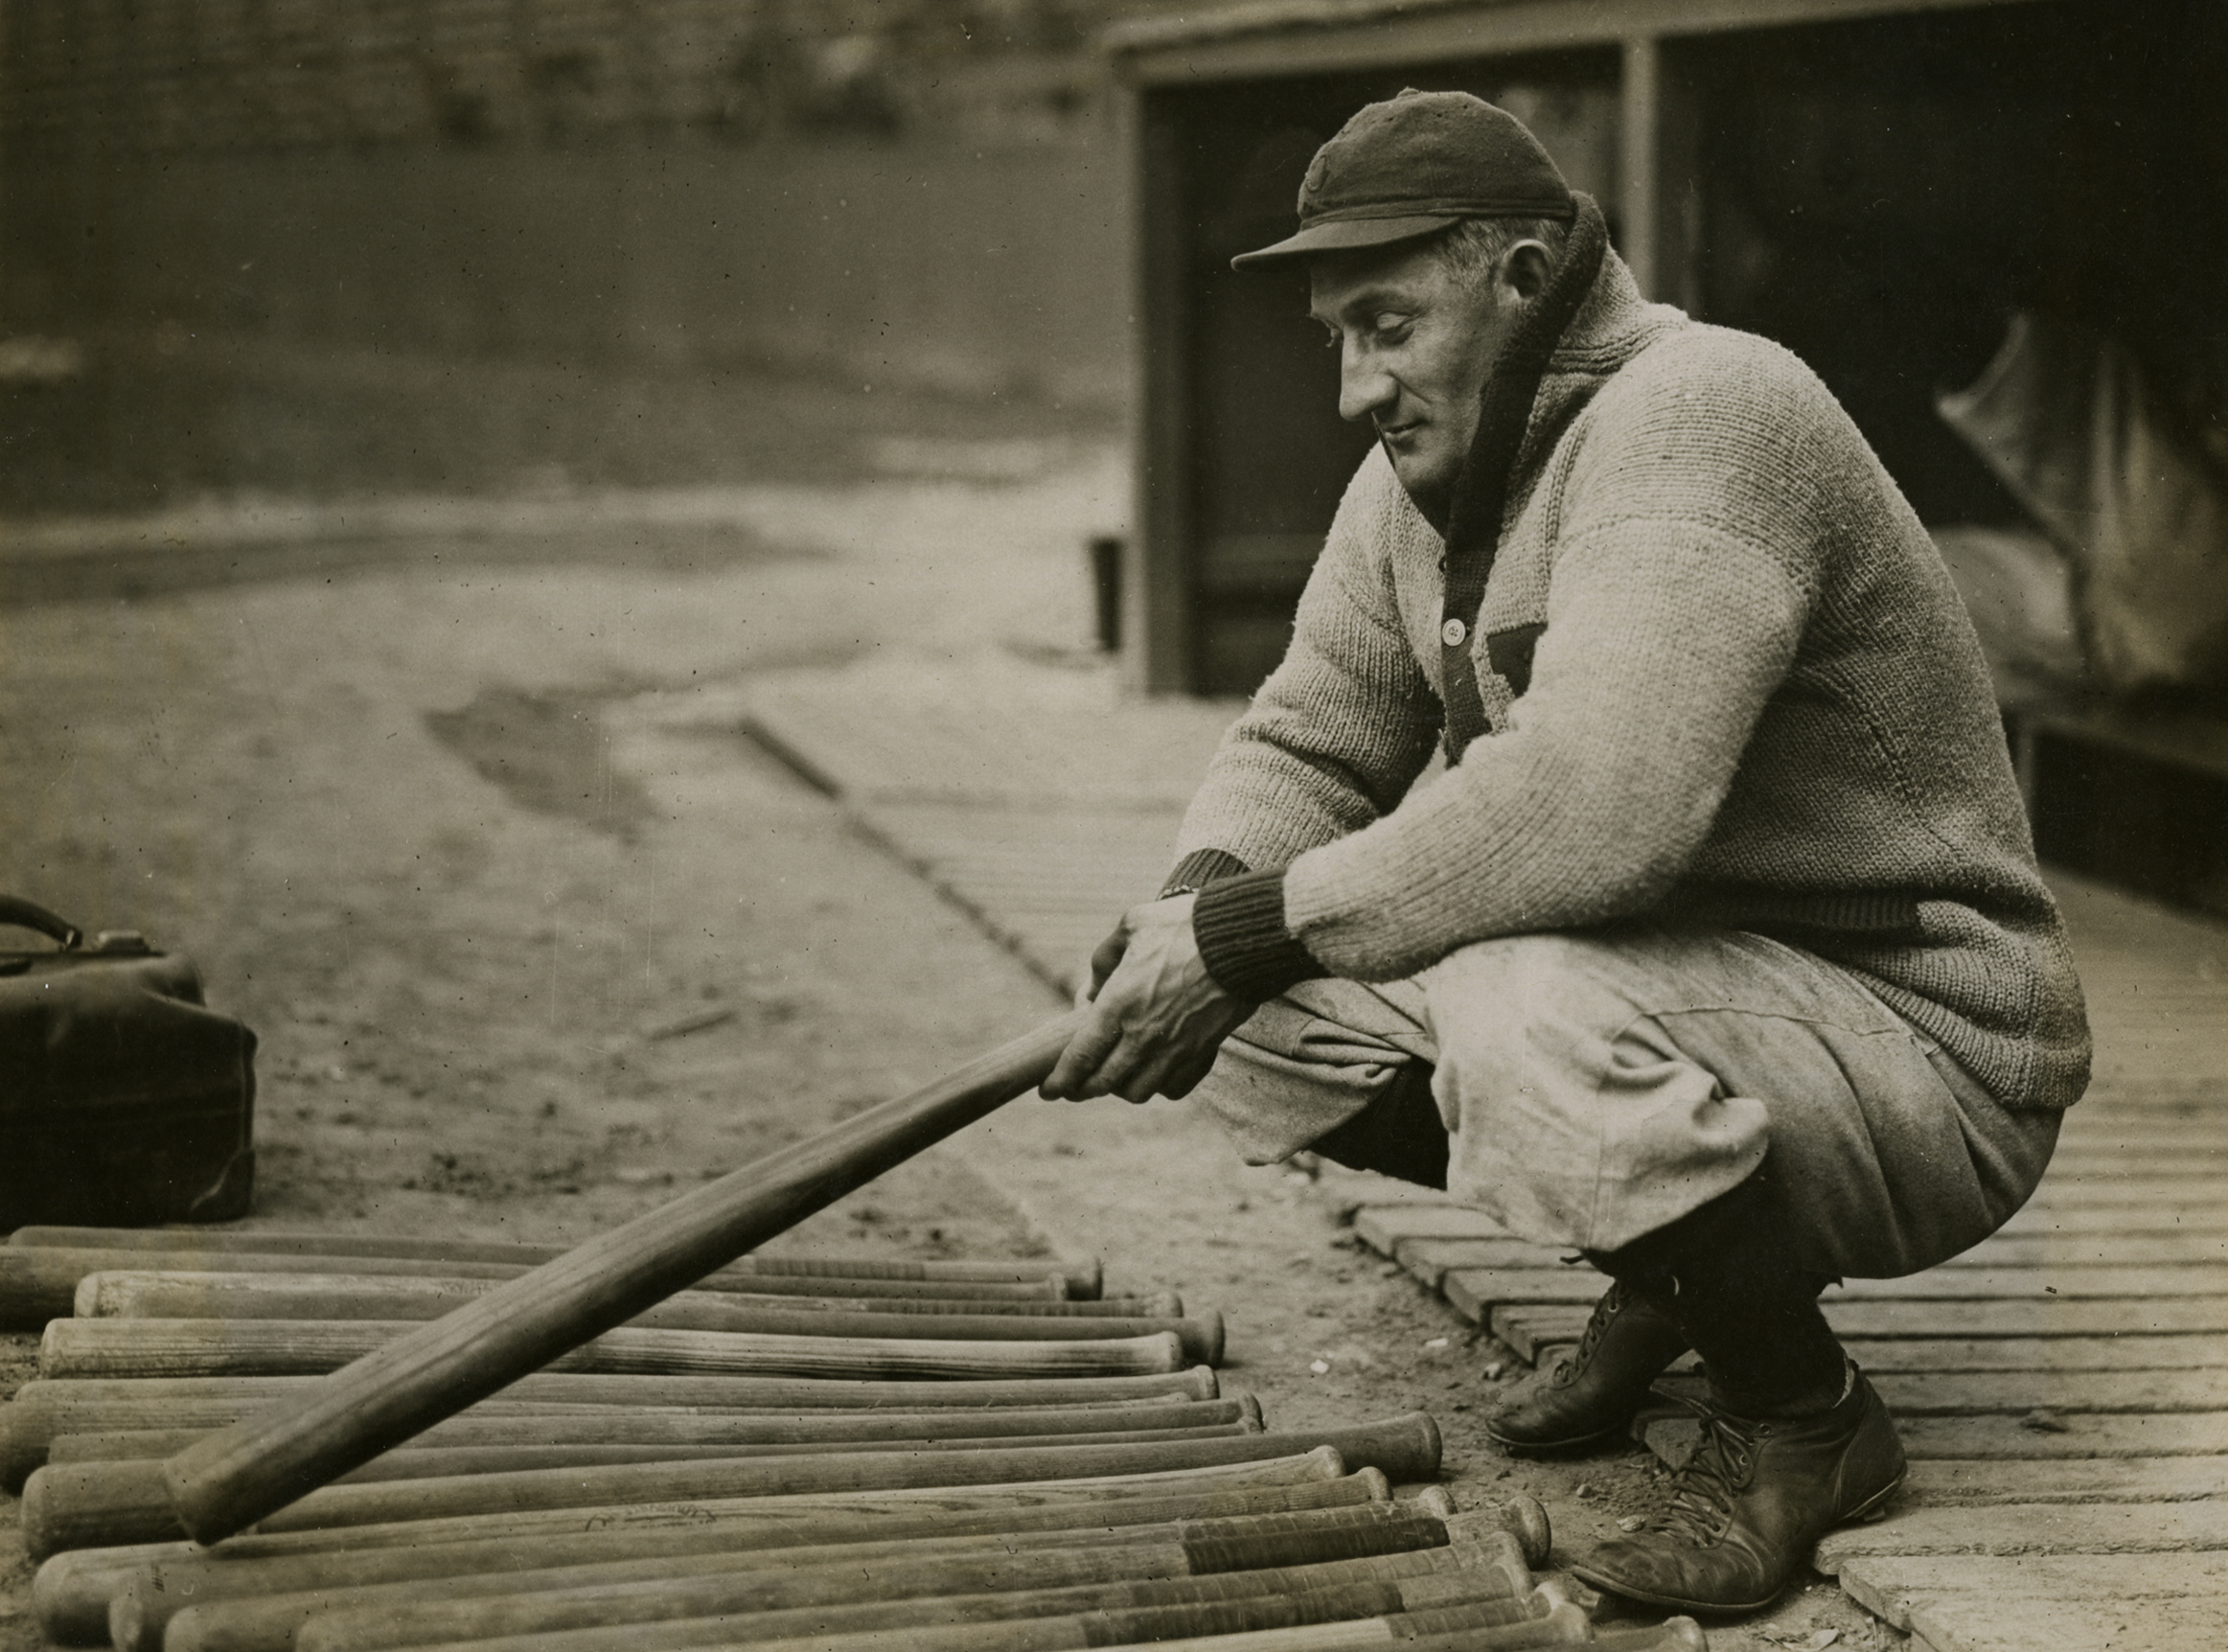 Pittsburgh great Honus Wagner selects a bat in front of the Pirates dugout, 1915.